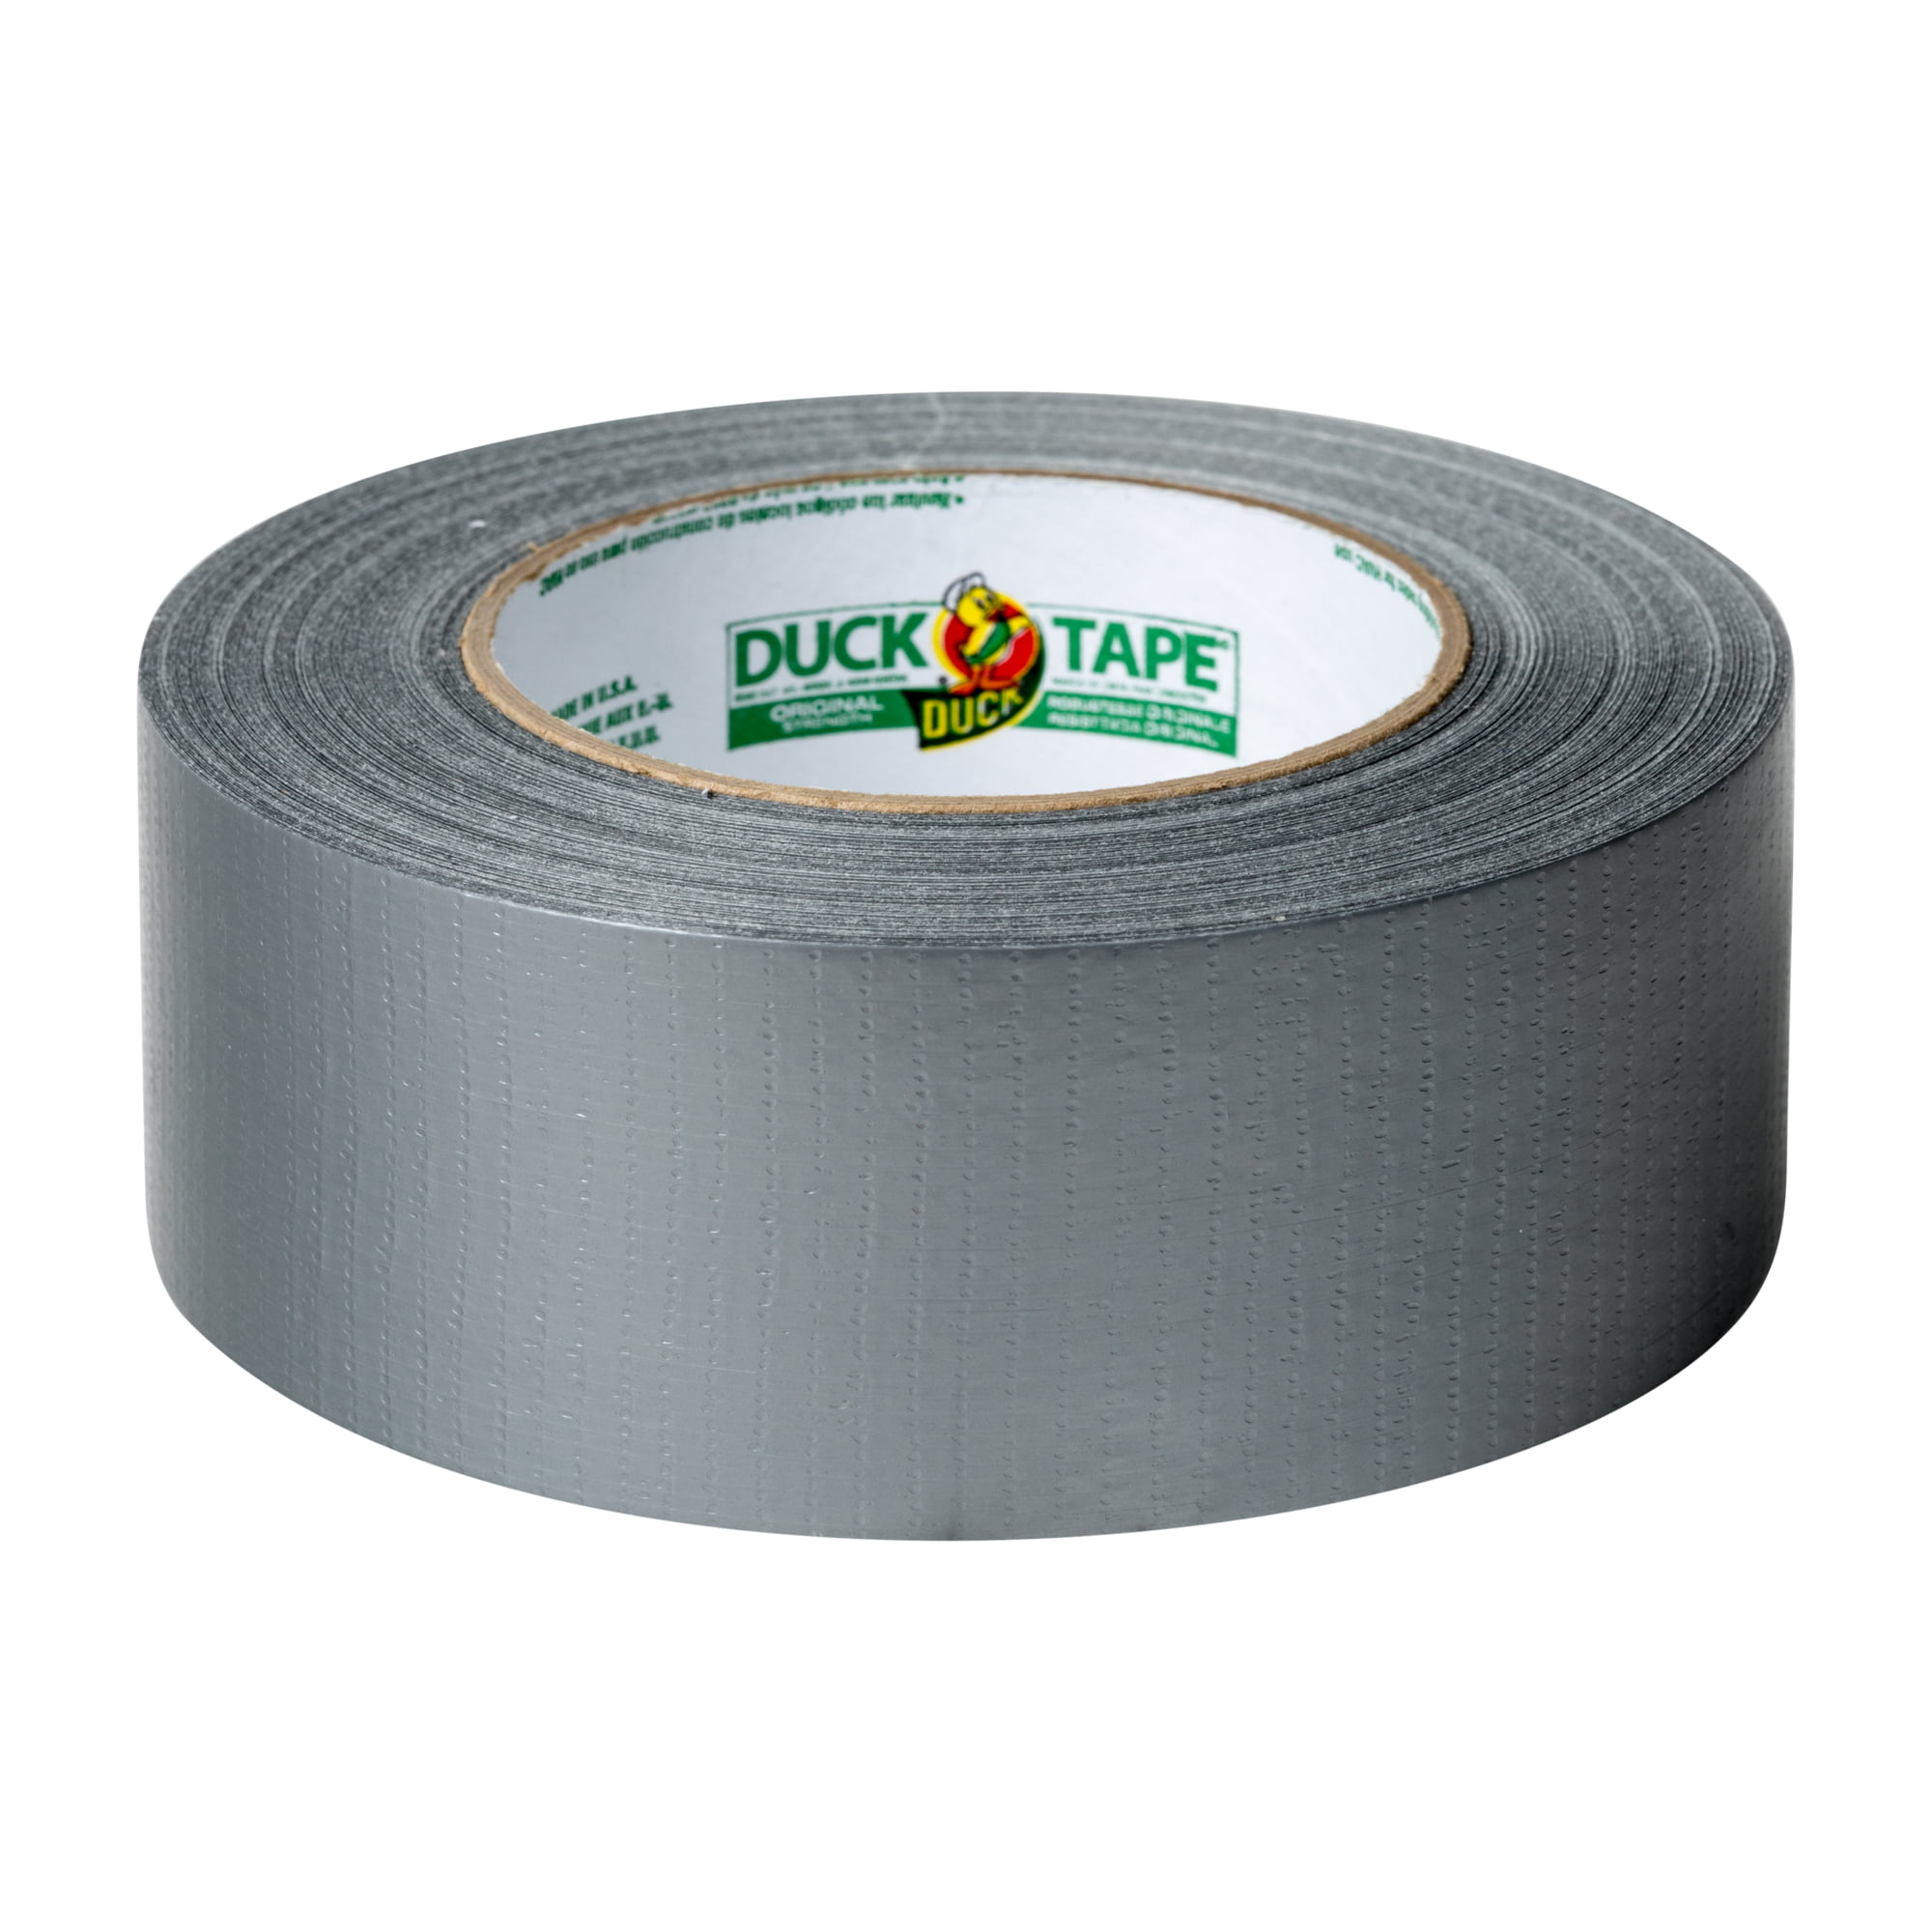 Black 1938. Extra Wide Duct Tape 3" x 60 yards 